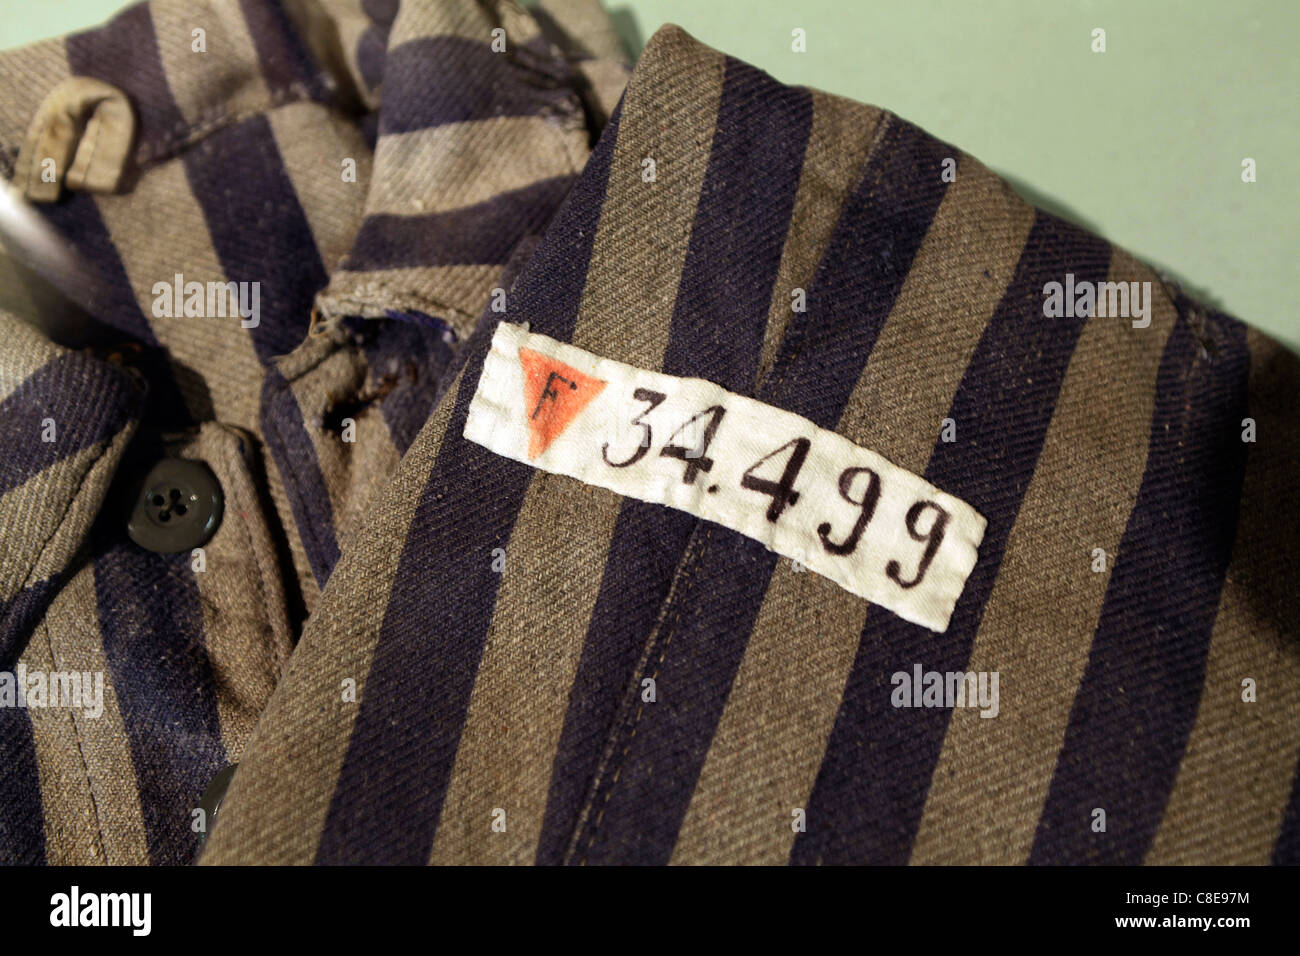 World War 2 Concentration Camp Uniform from Dachau. The red triangle indicates a political prisoner. Stock Photo